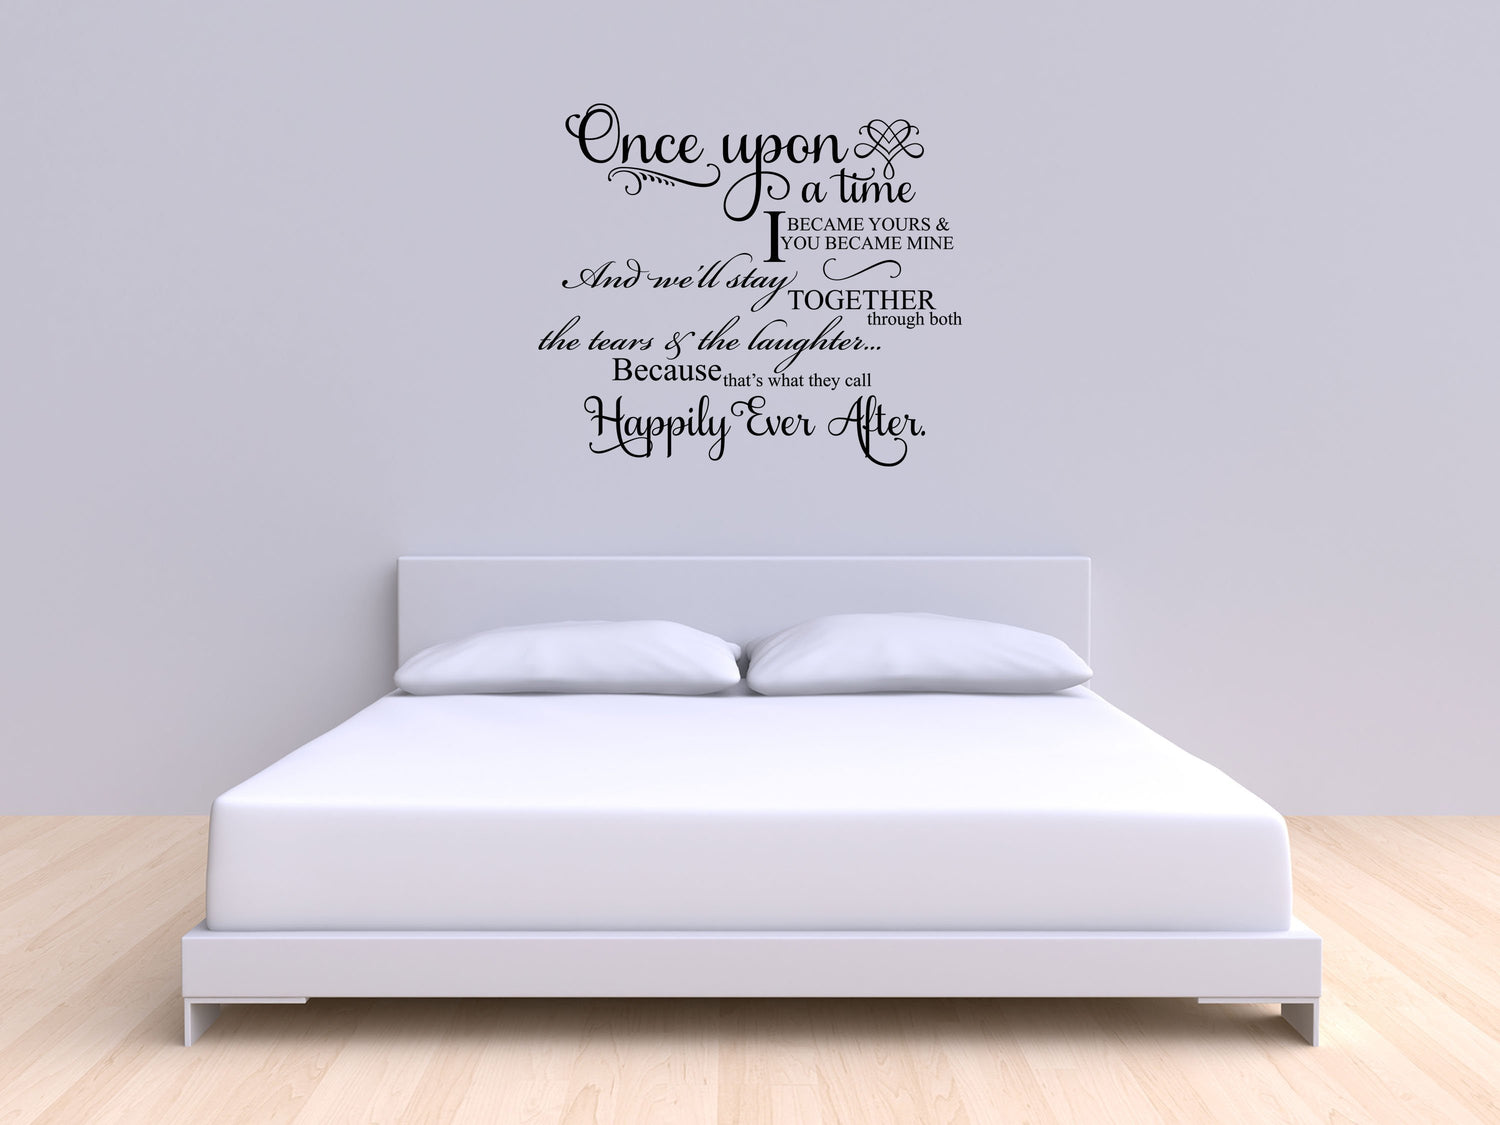 Once Upon A Time I Became Yours Vinyl Wall Sayings - Inspirational Wall Decals Vinyl Wall Decal Inspirational Wall Signs 